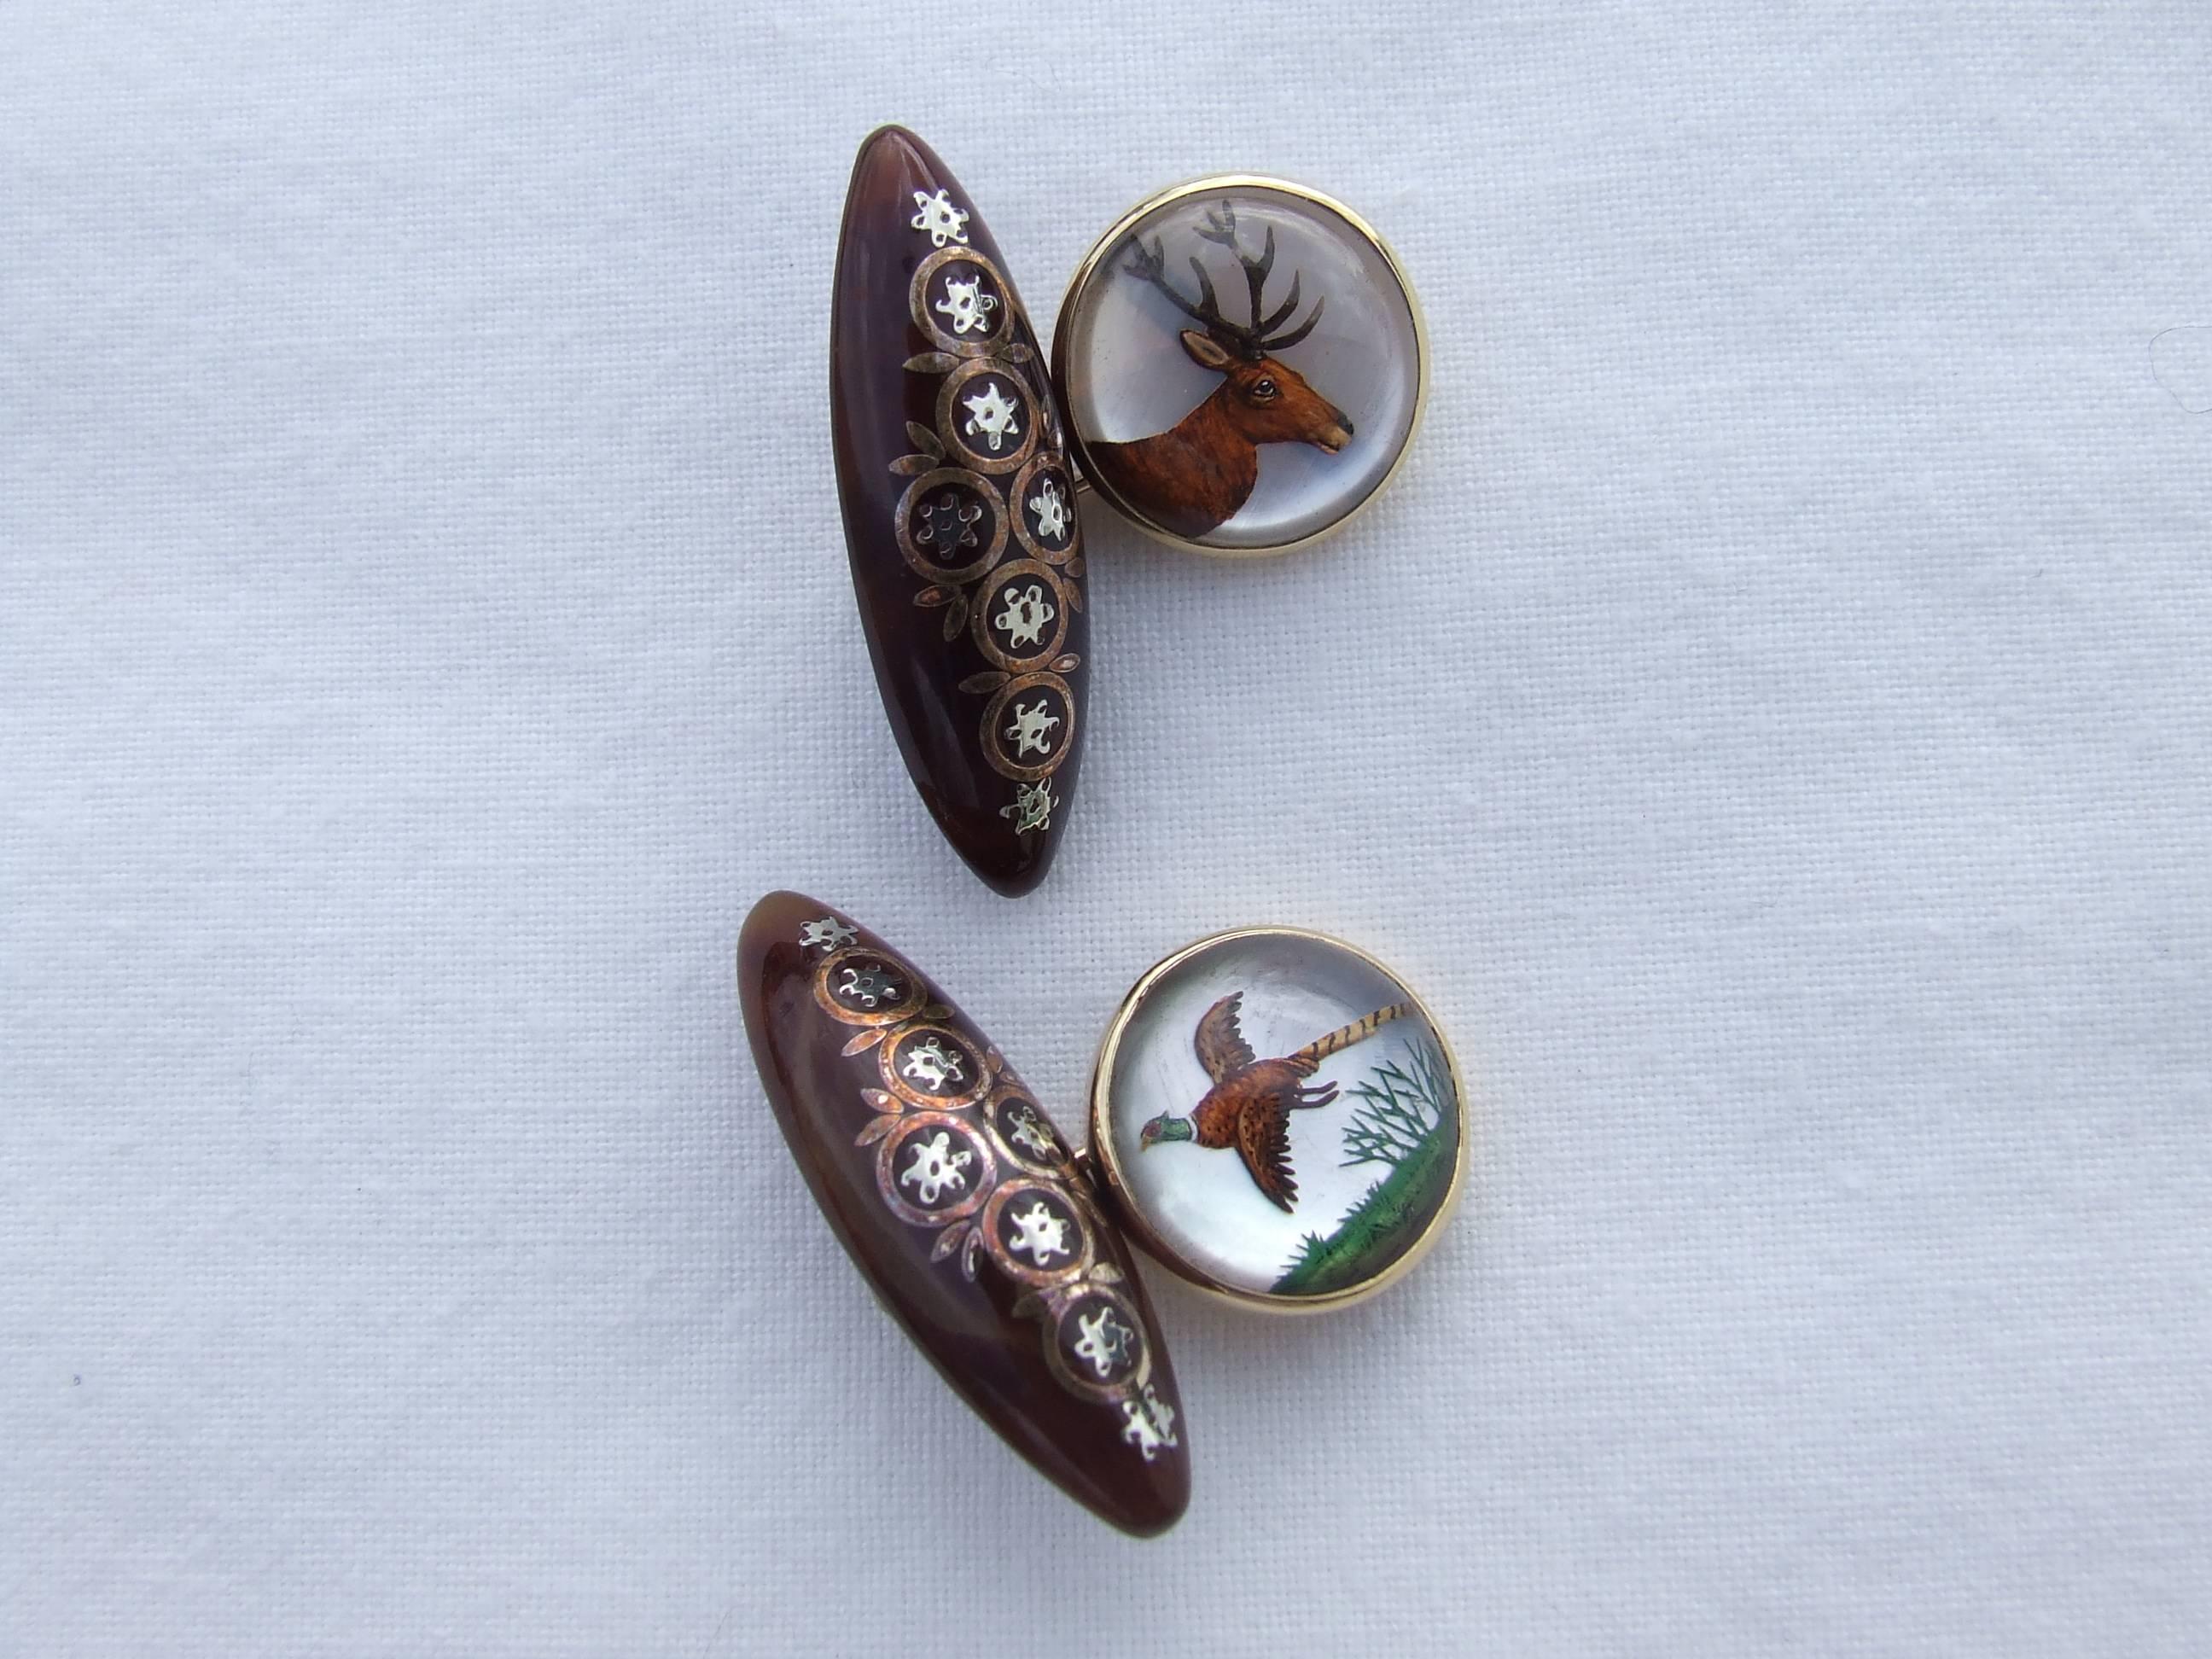 Absolutely Gorgeous Authentic Vintage Hermès Cufflinks

Pattern: Deer and Partridge

Decorated with 